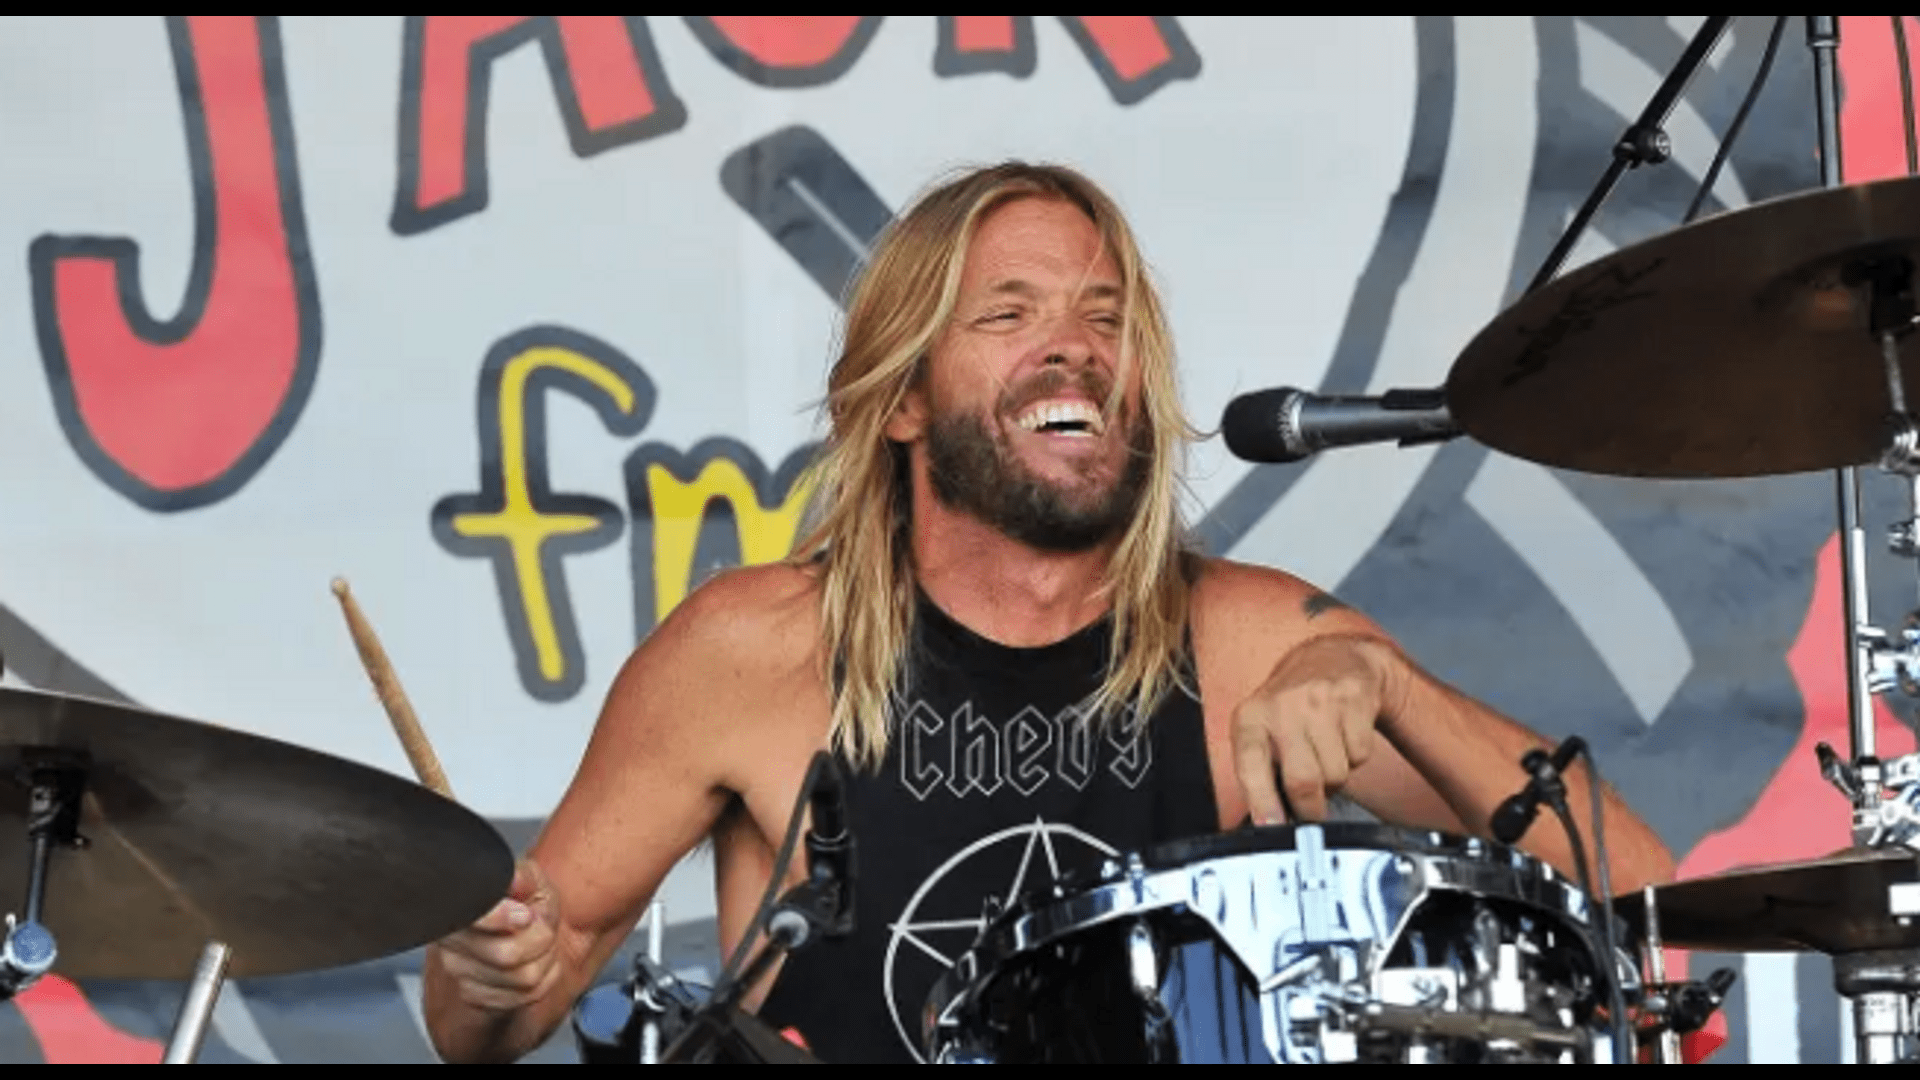 The Foo Fighters have canceled their current World Tour following the death of Taylor Hawkins